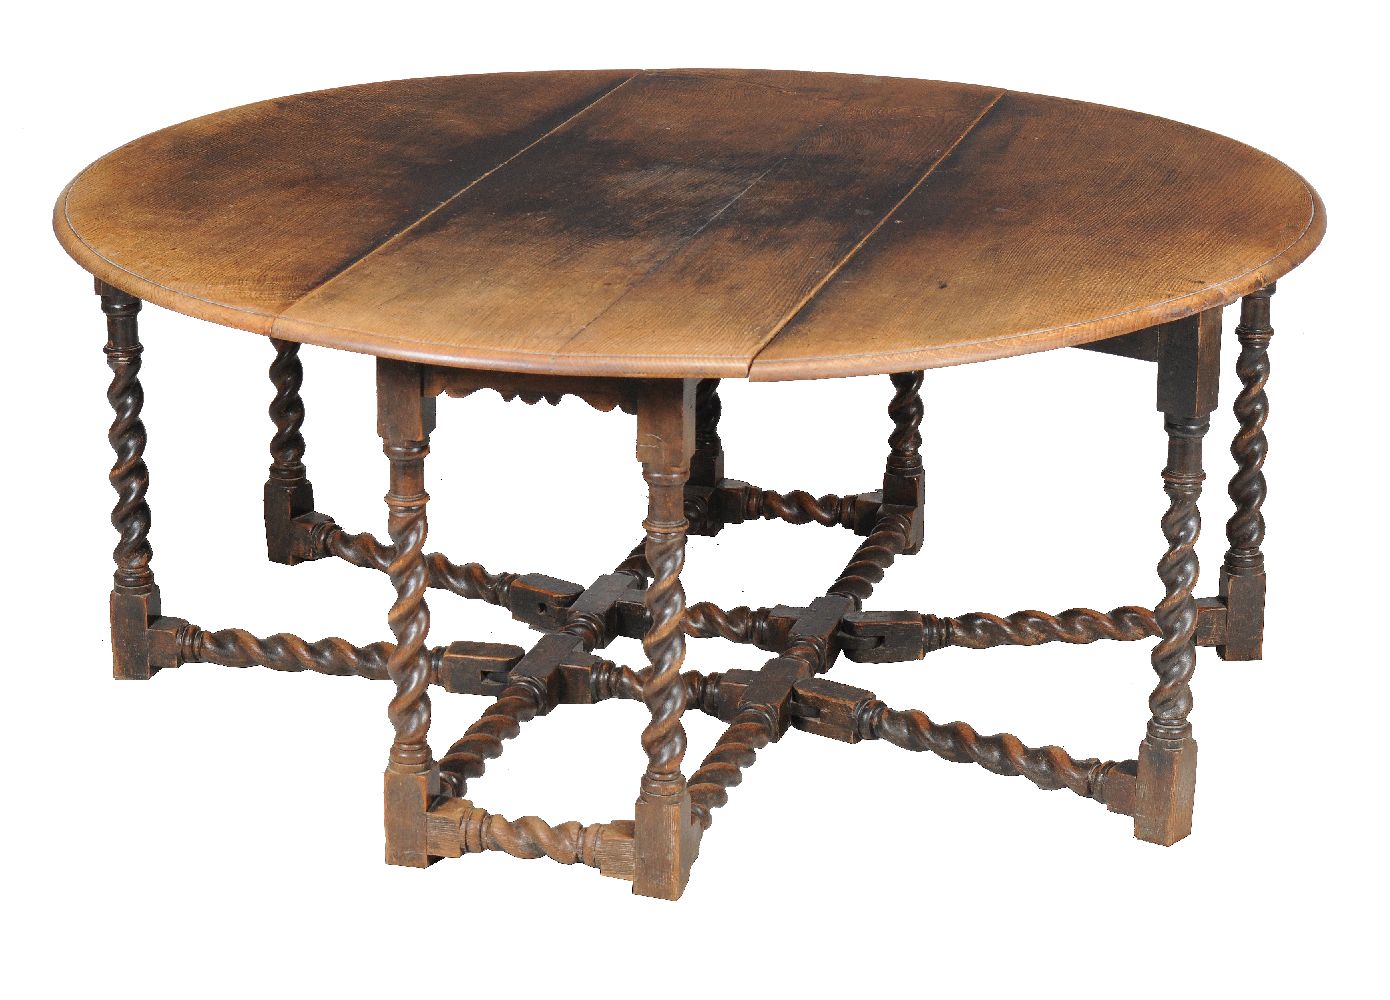 An oak gateleg dining table in 17th century style, 19th century, with spiral turned legs and